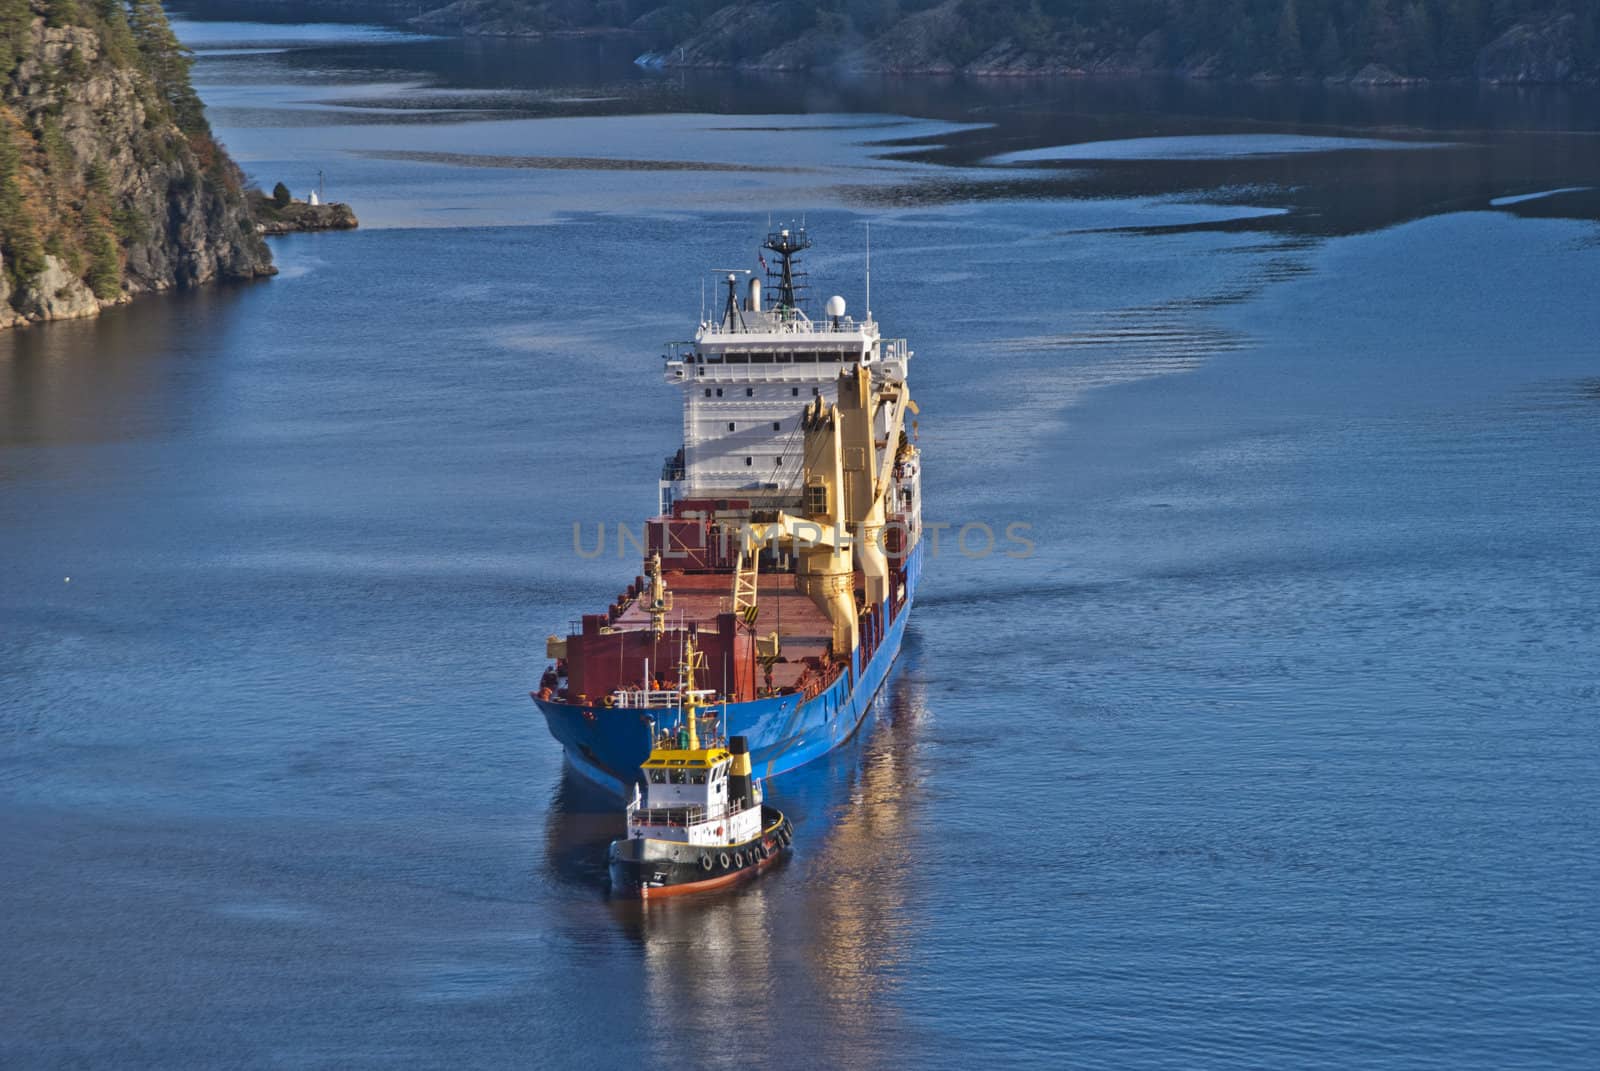 tug herbert are towing bbc europe out of the fjord, image 28 by steirus